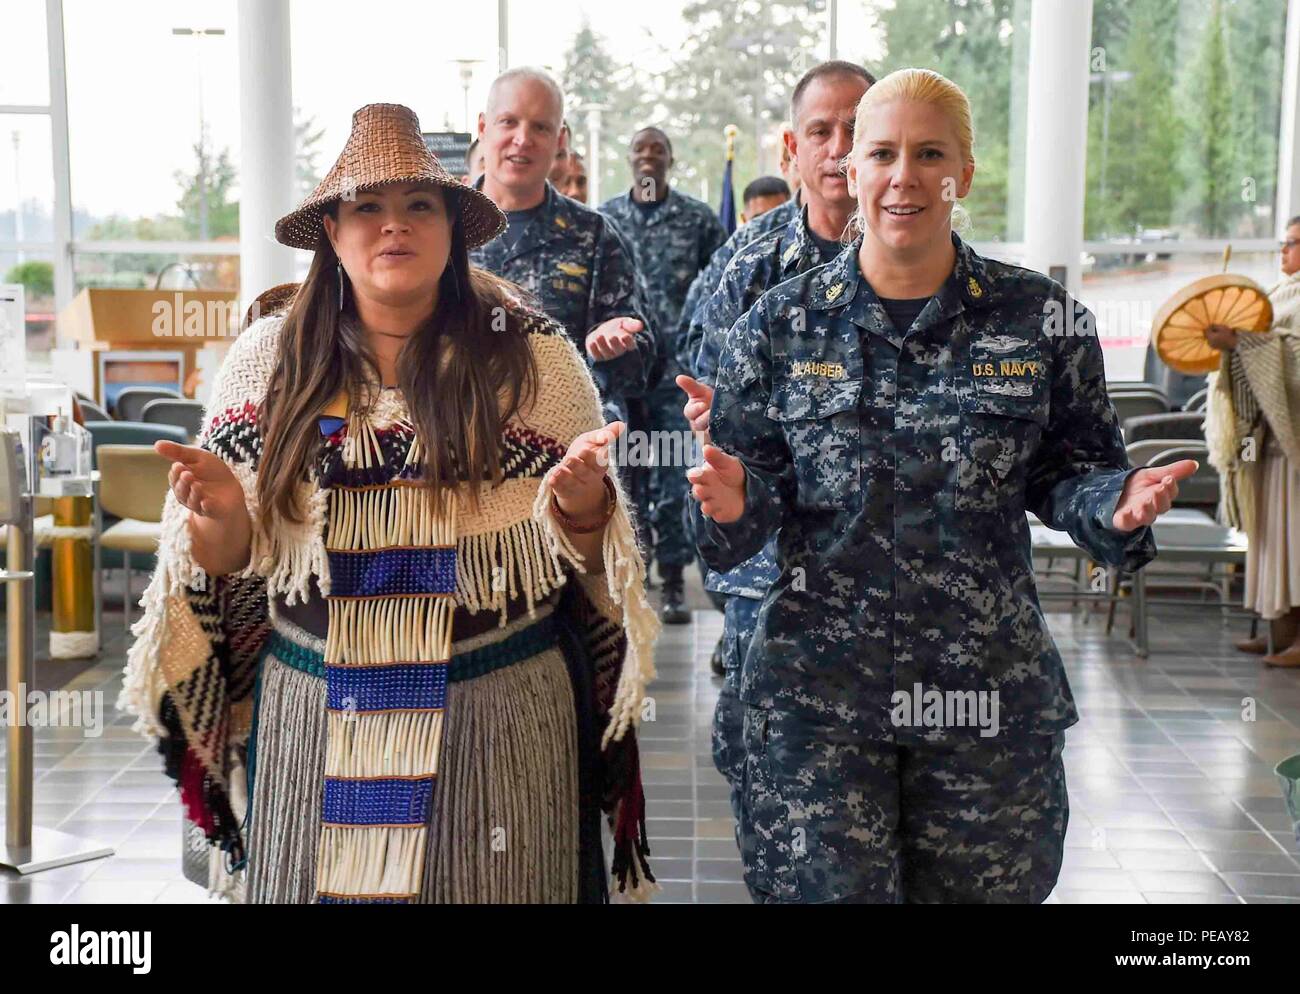 Naval Hospital Bremerton (Nov. 23, 2015) Staff members perform a traditional tribal dance at Naval Hospital Bremerton for a Native American Heritage Ceremony in honor of Native American Heritage Month. (U.S. Navy photo by Mass Communication Specialist 3rd Class Shauna C. Sowersby/Released) Stock Photo